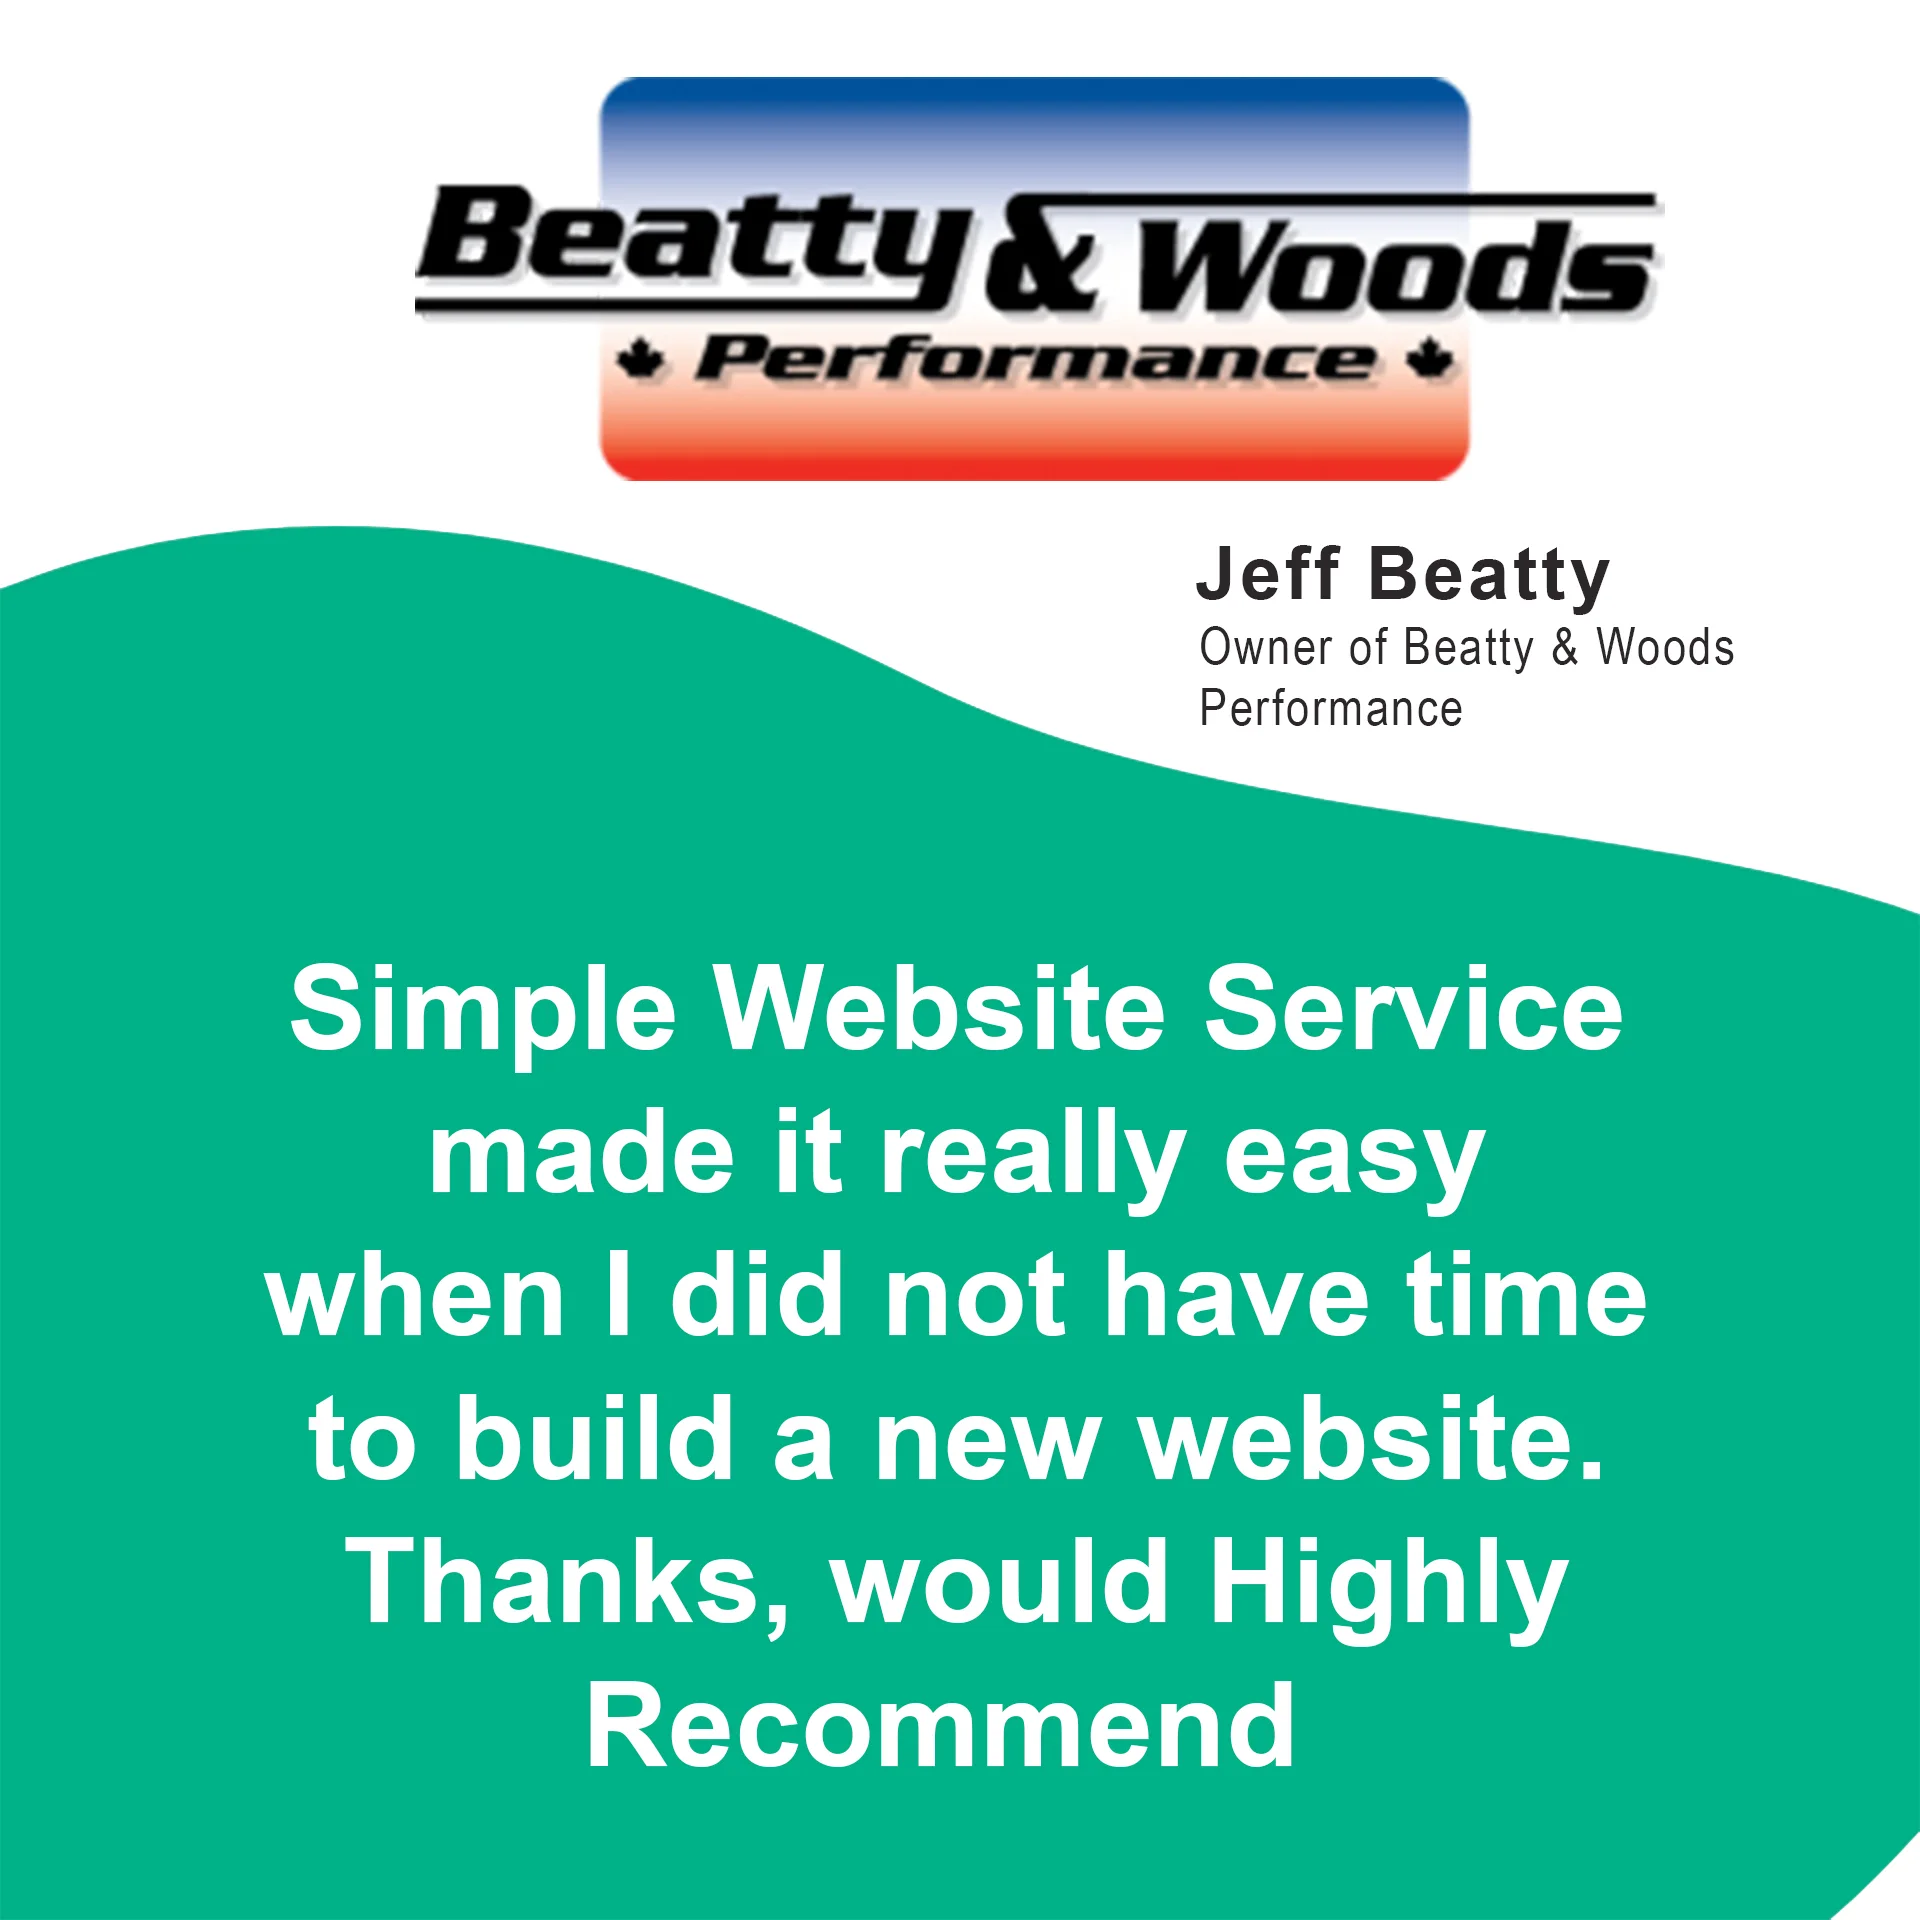 Beatty & Woods Performance gives 5-Star Review to SimpleWebsiteService.ca